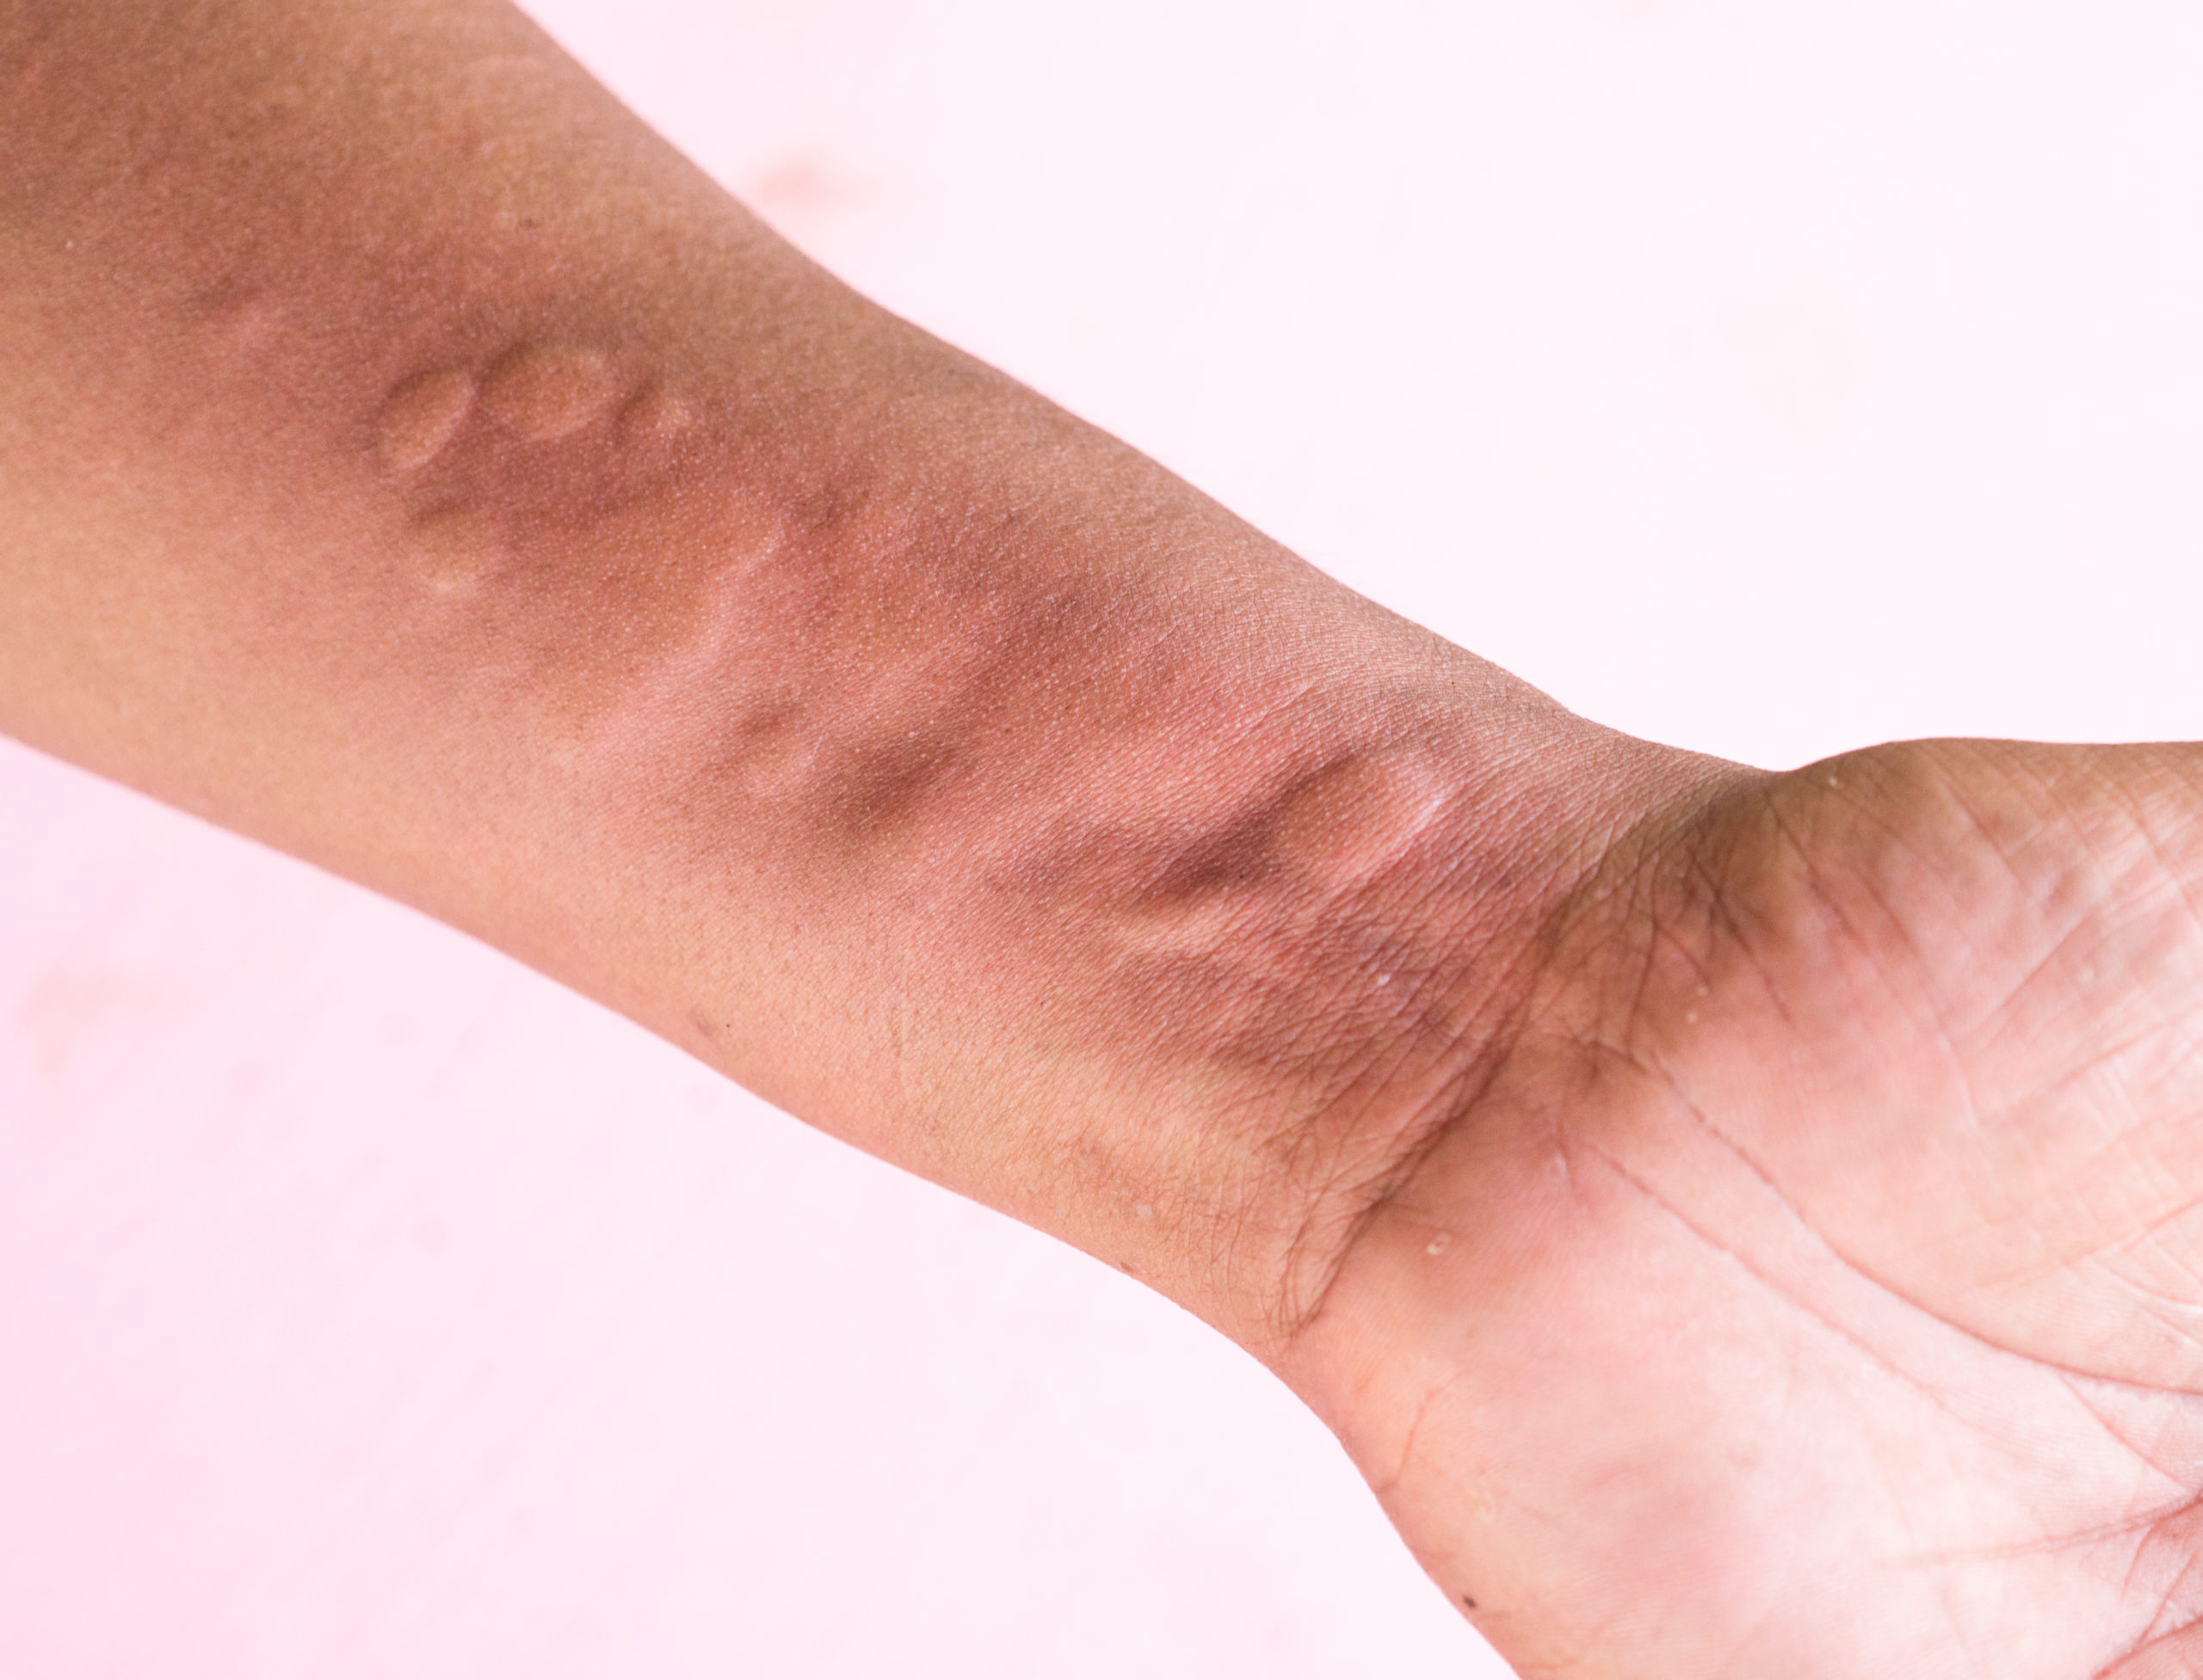 Image of a forearm with red bumps and flat welts